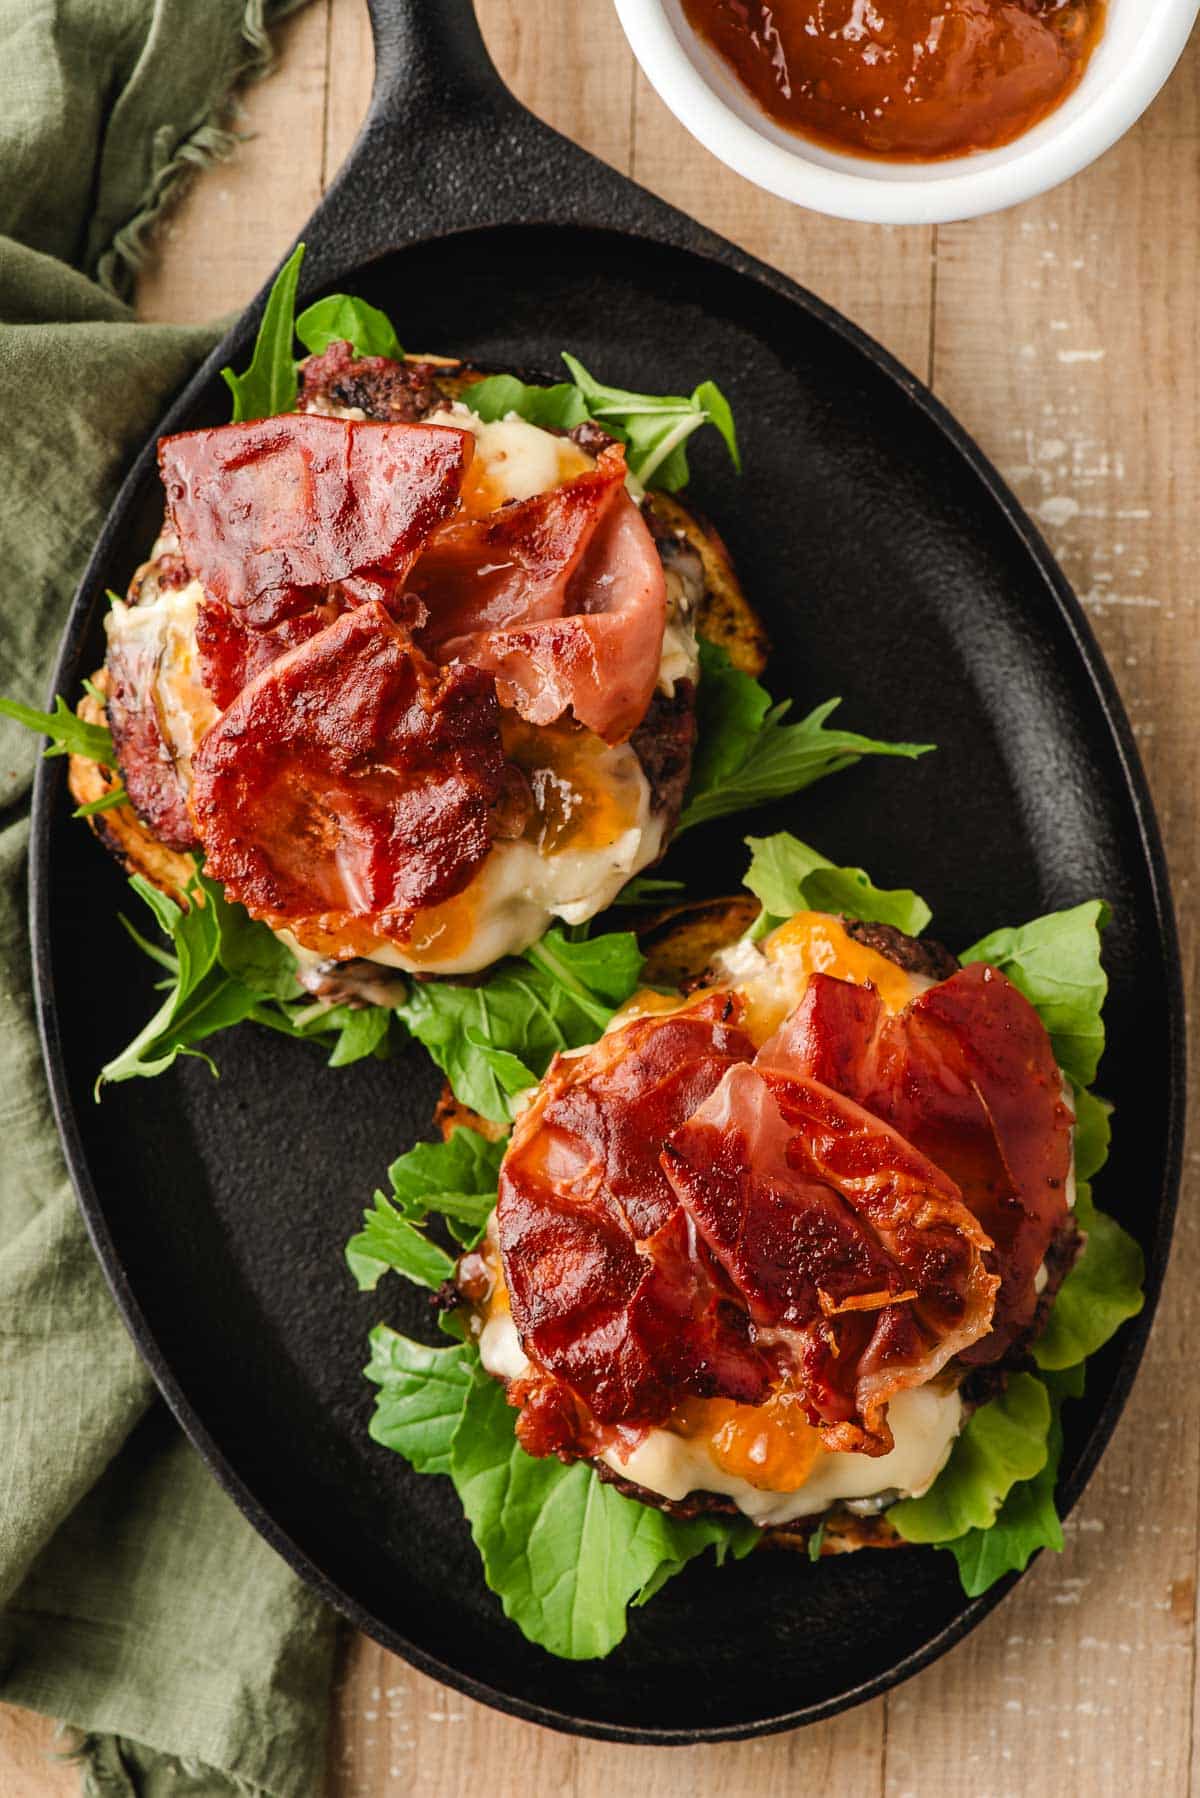 Picture of brie burgers, open faced, with crispy prosciutto on top.